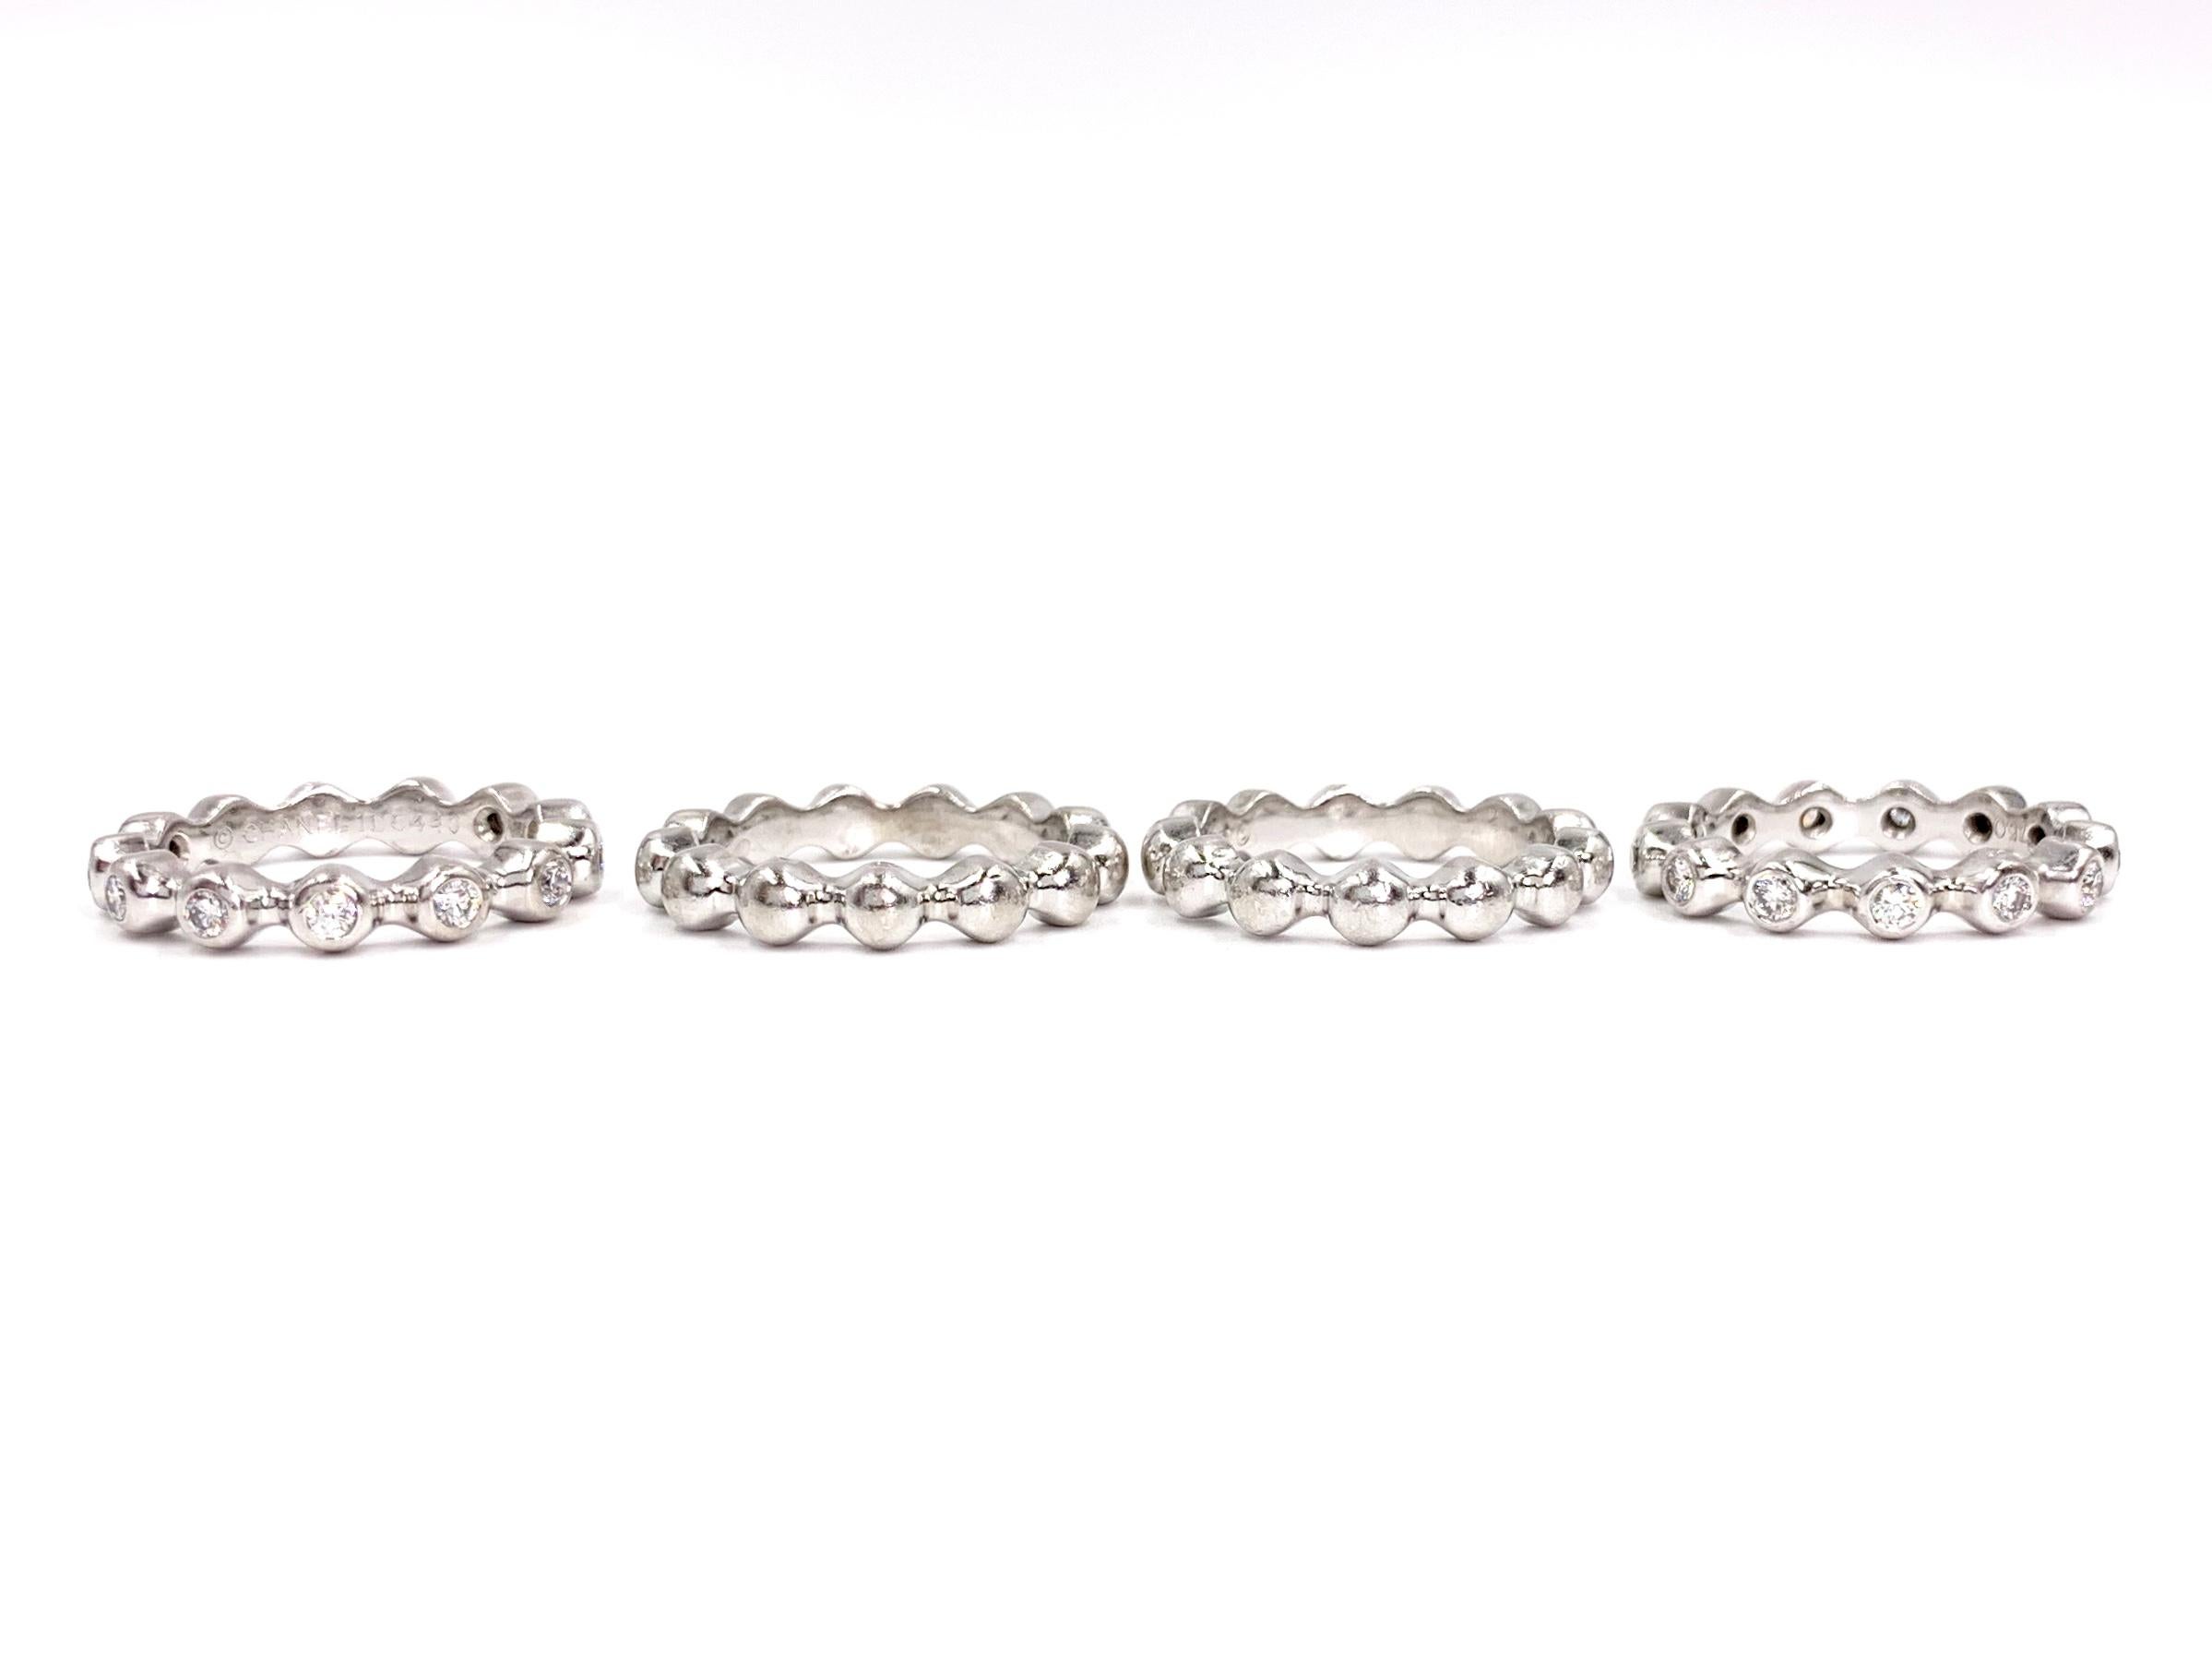 Set of four signed CHANEL solid 18 karat white gold stackable rings. Two of the rings feature 13 burnished diamonds at .48 carats total weight each (.96 carats total weight between the two). Diamond quality is F color, VVS1 clarity. Rings are